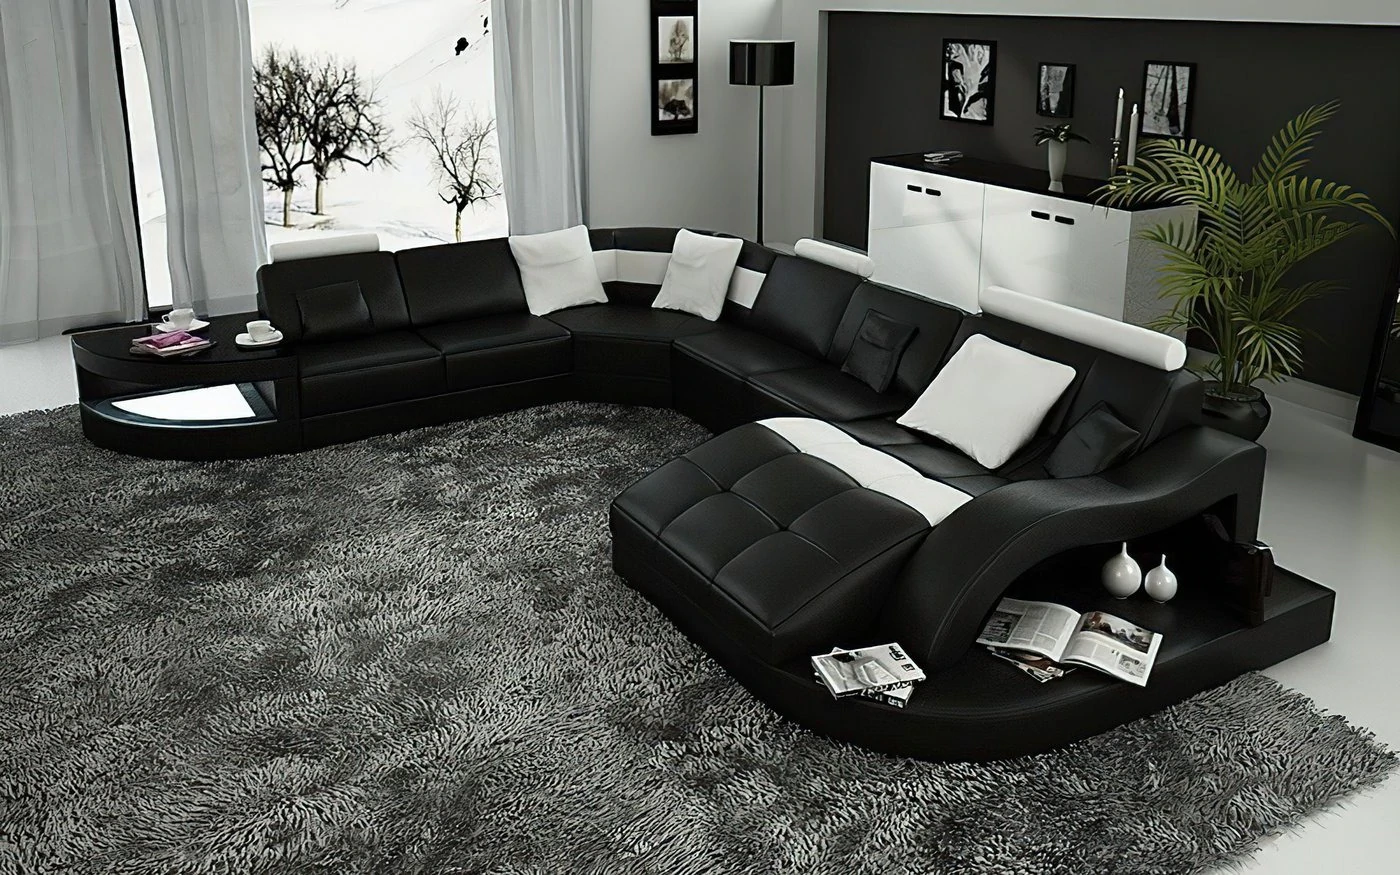 Navasota Black Large Leather Sectional with Shape Chaise